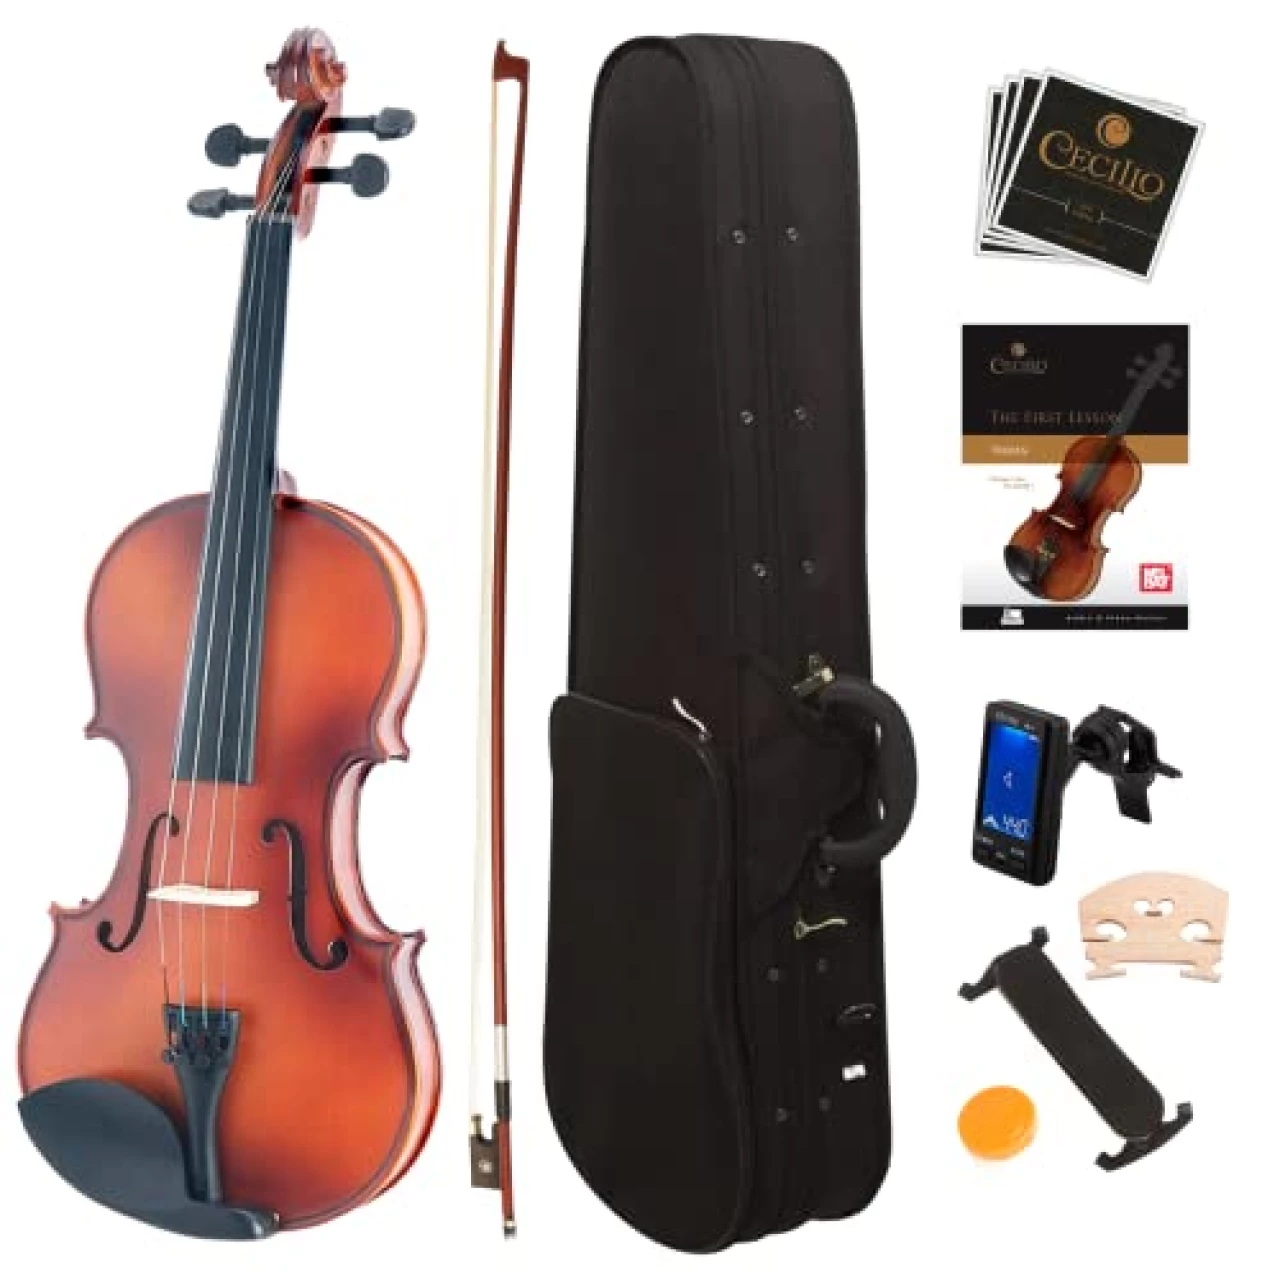 Mendini By Cecilio Violin For Kids &amp; Adults - 4/4 MV300 Satin Antique, Student or Beginners Kit w/Case, Bow, Extra Strings, Tuner, Lesson Book - Stringed Musical Instruments